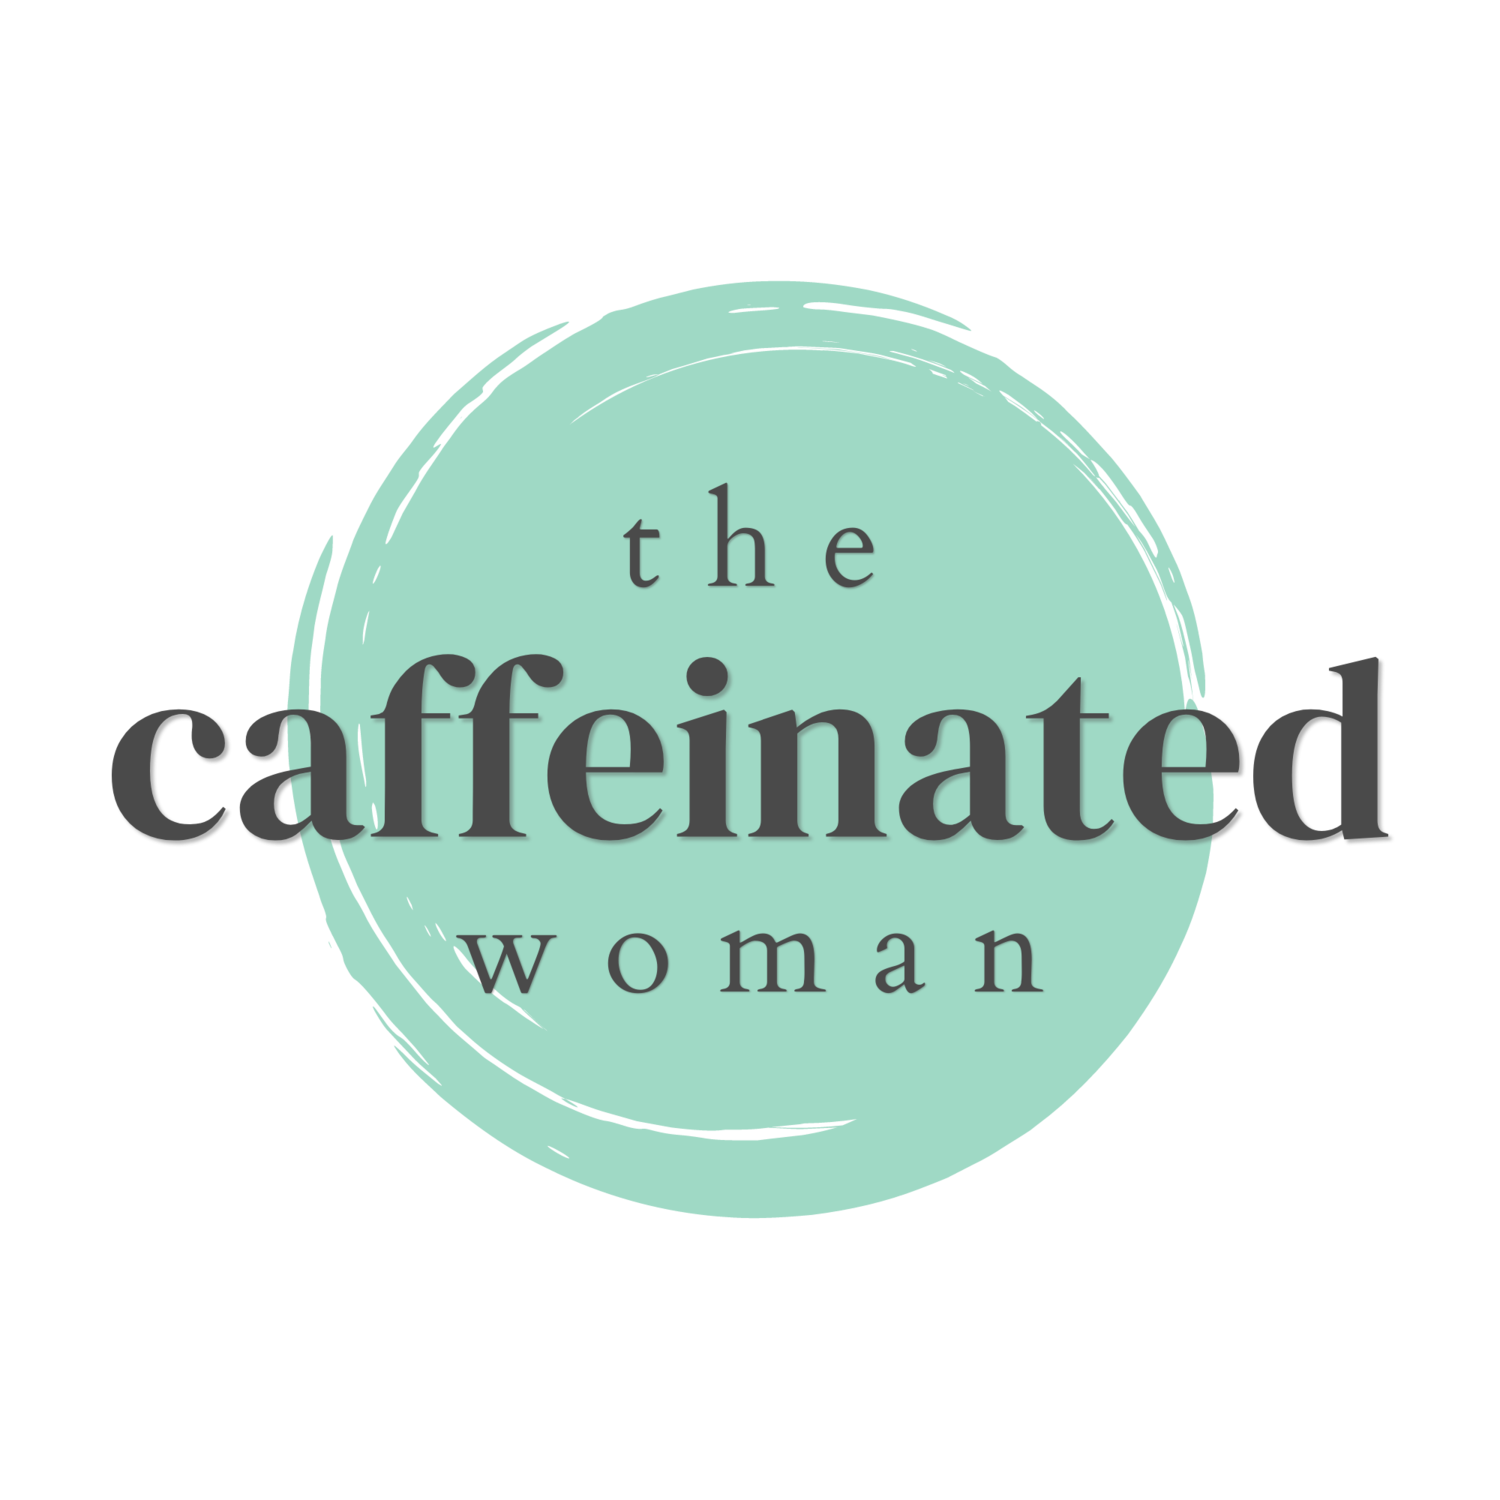 The Caffeinated Woman | Laura DeGroot